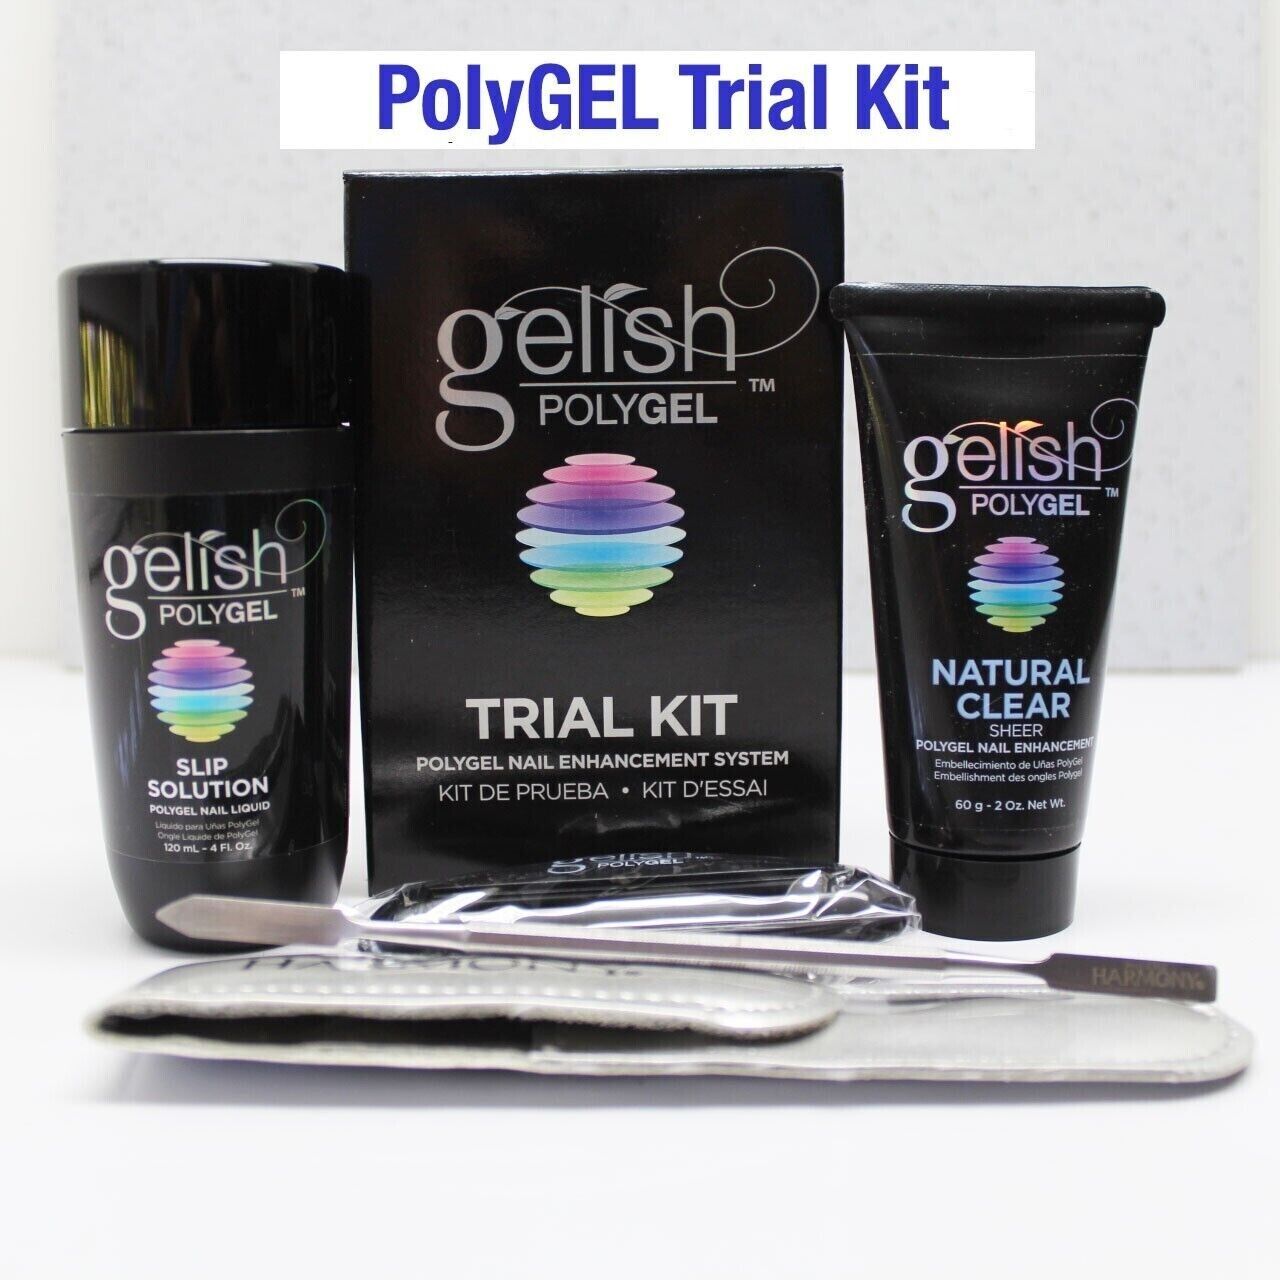 Gelish Professional Nail All-in-One Trial Kit for sale online | eBay